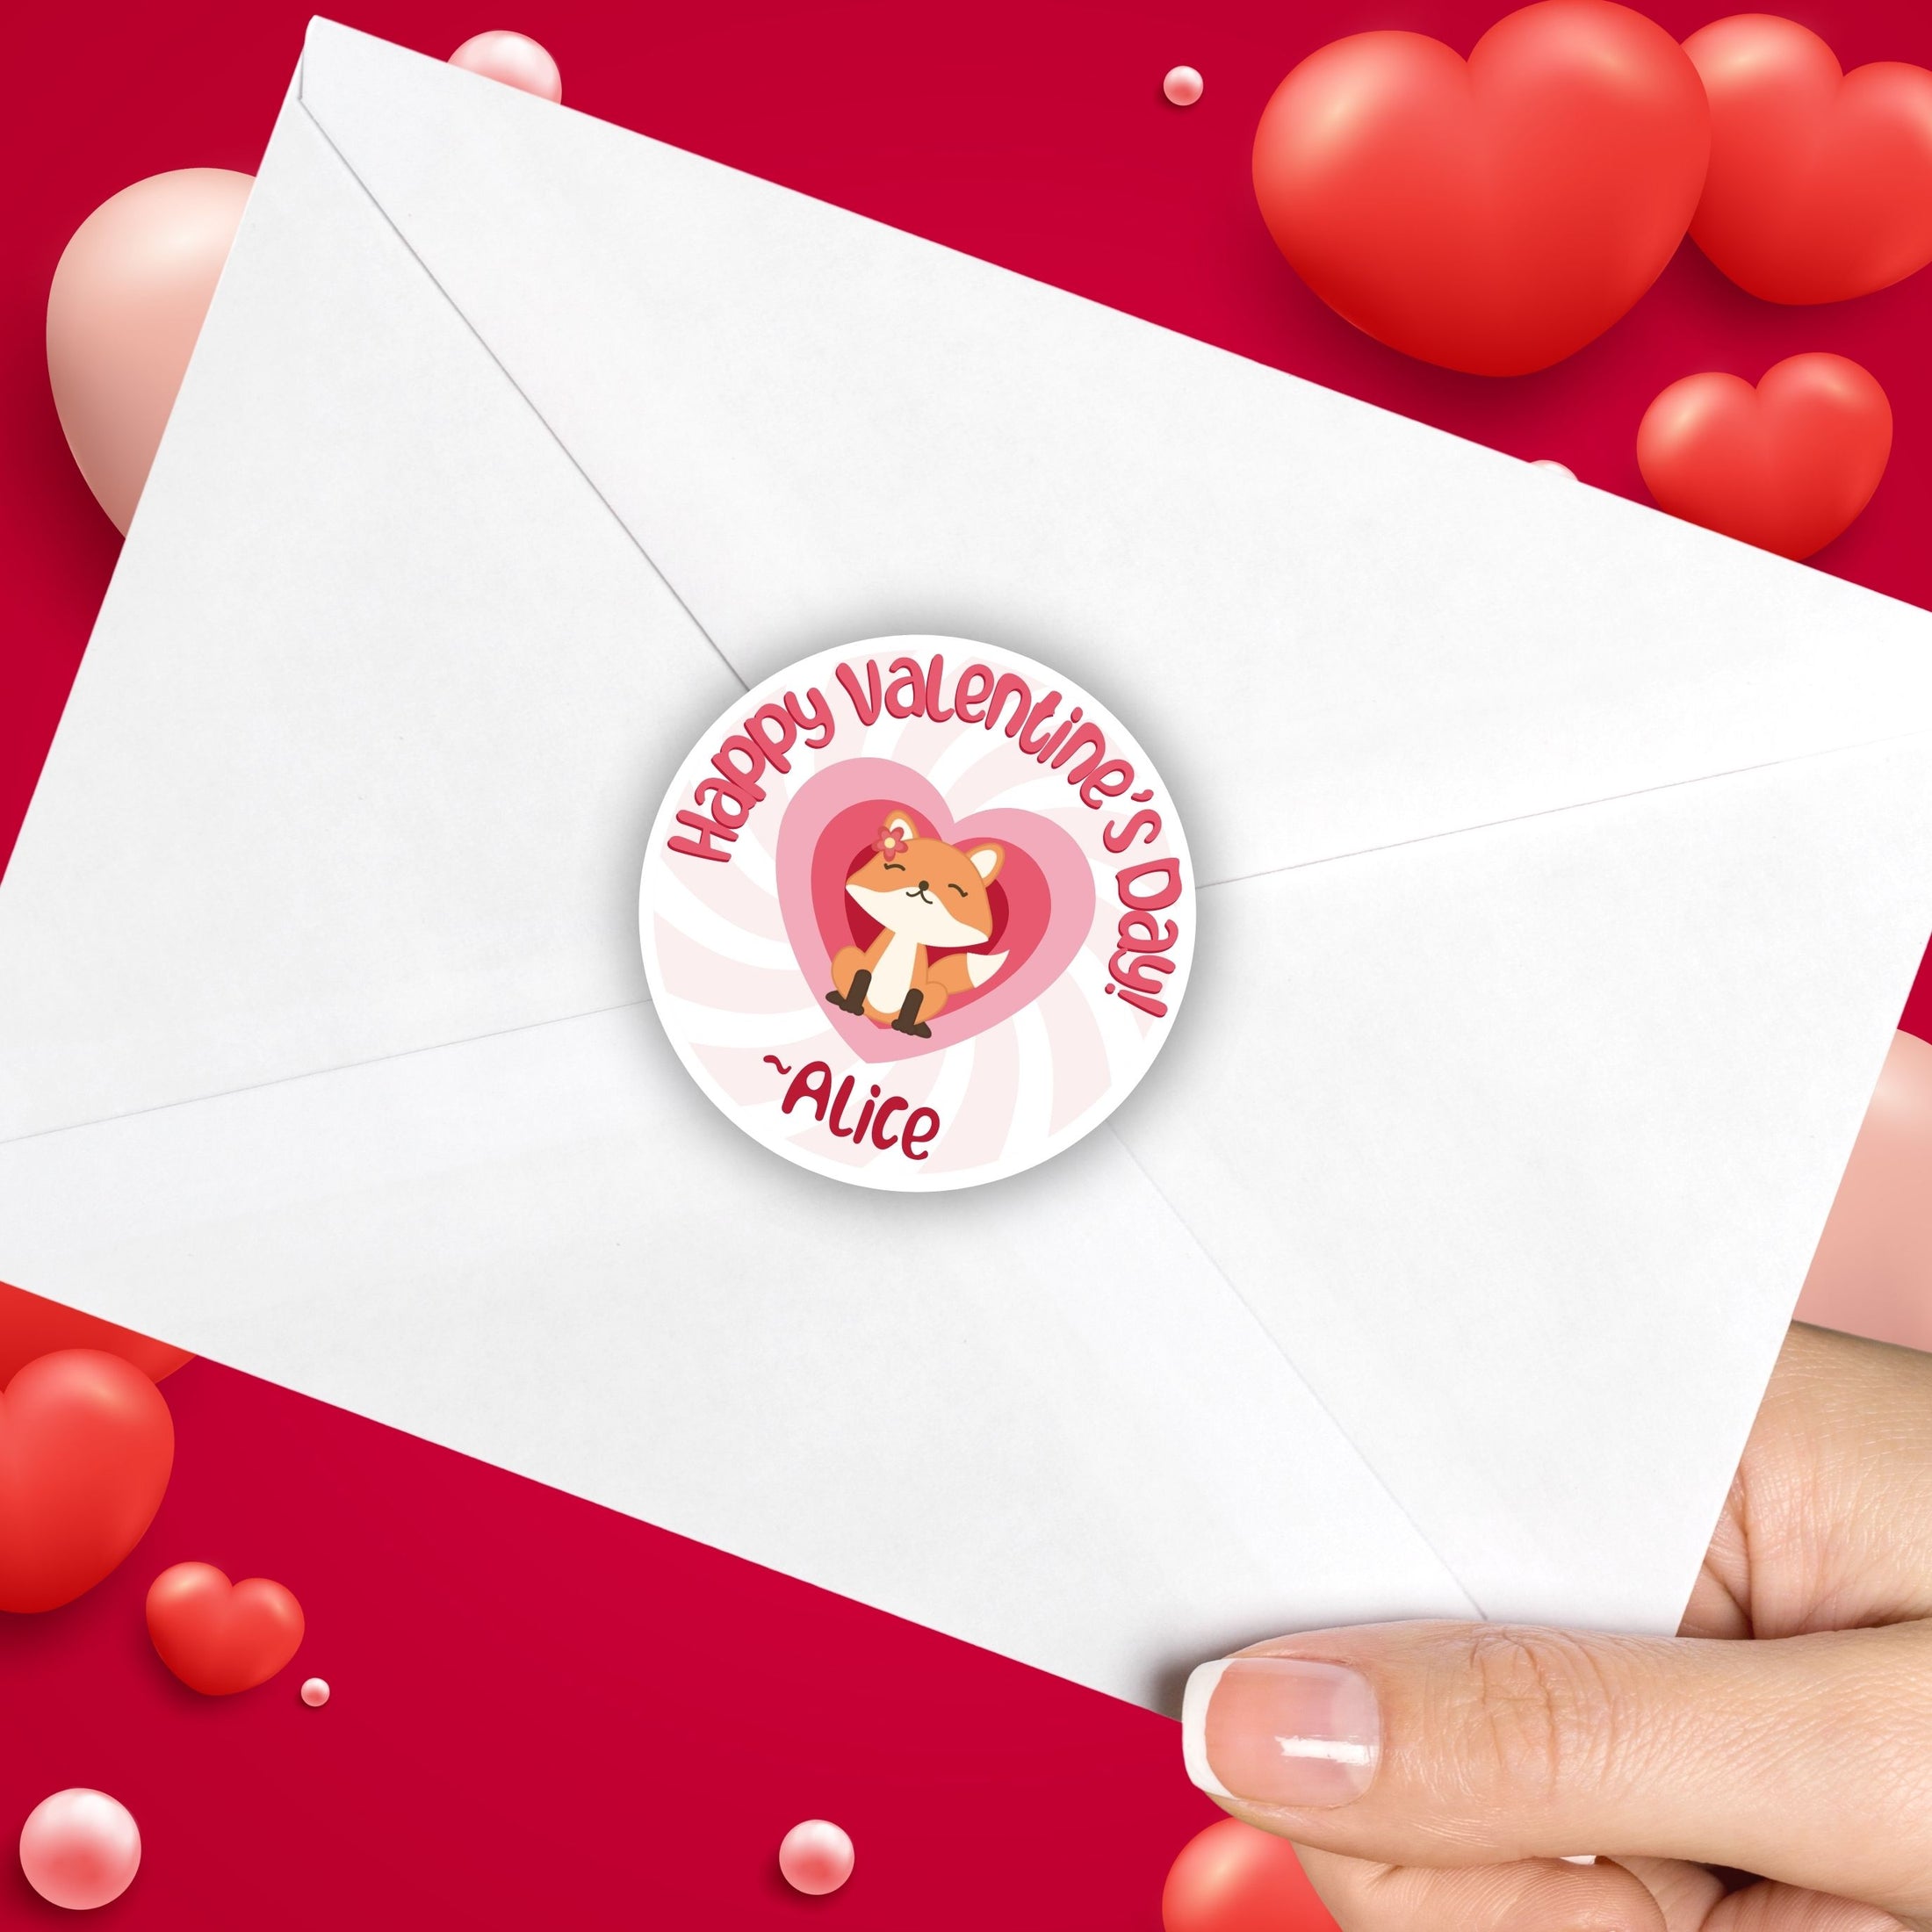 This image shows the personalized valentine sticker on the back of an envelope.